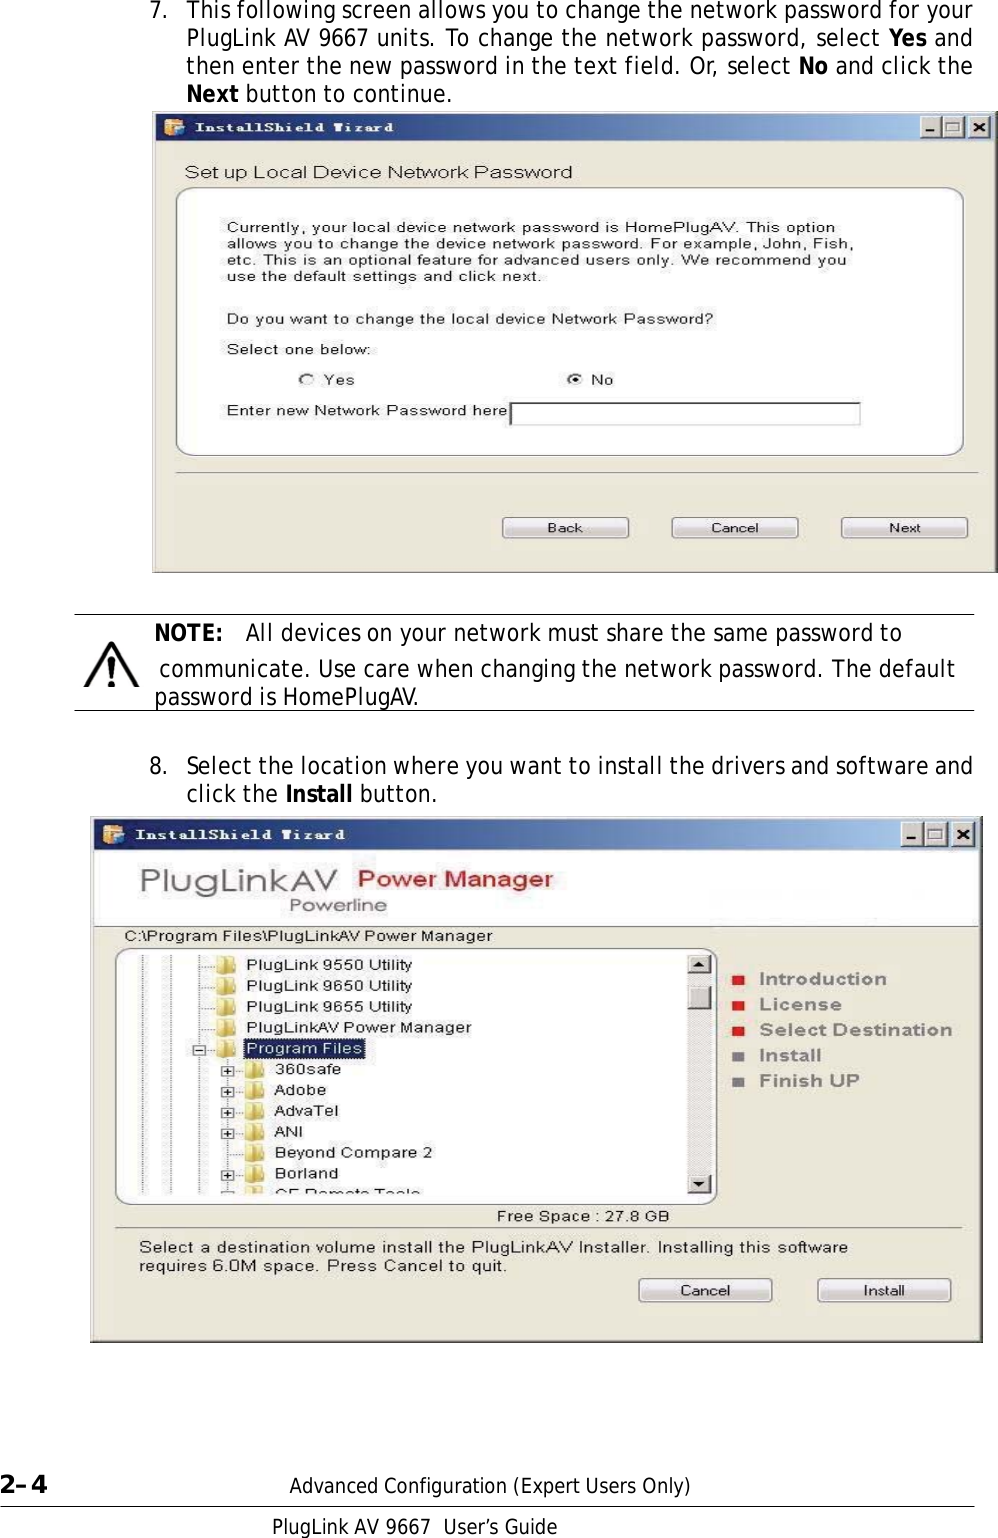   7.  This following screen allows you to change the network password for your PlugLink AV 9667 units. To change the network password, select Yes and then enter the new password in the text field. Or, select No and click the Next button to continue.     NOTE:  All devices on your network must share the same password to   communicate. Use care when changing the network password. The default password is HomePlugAV.   8.  Select the location where you want to install the drivers and software and click the Install button.                          2–4  Advanced Configuration (Expert Users Only) PlugLink AV 9667  User’s Guide 